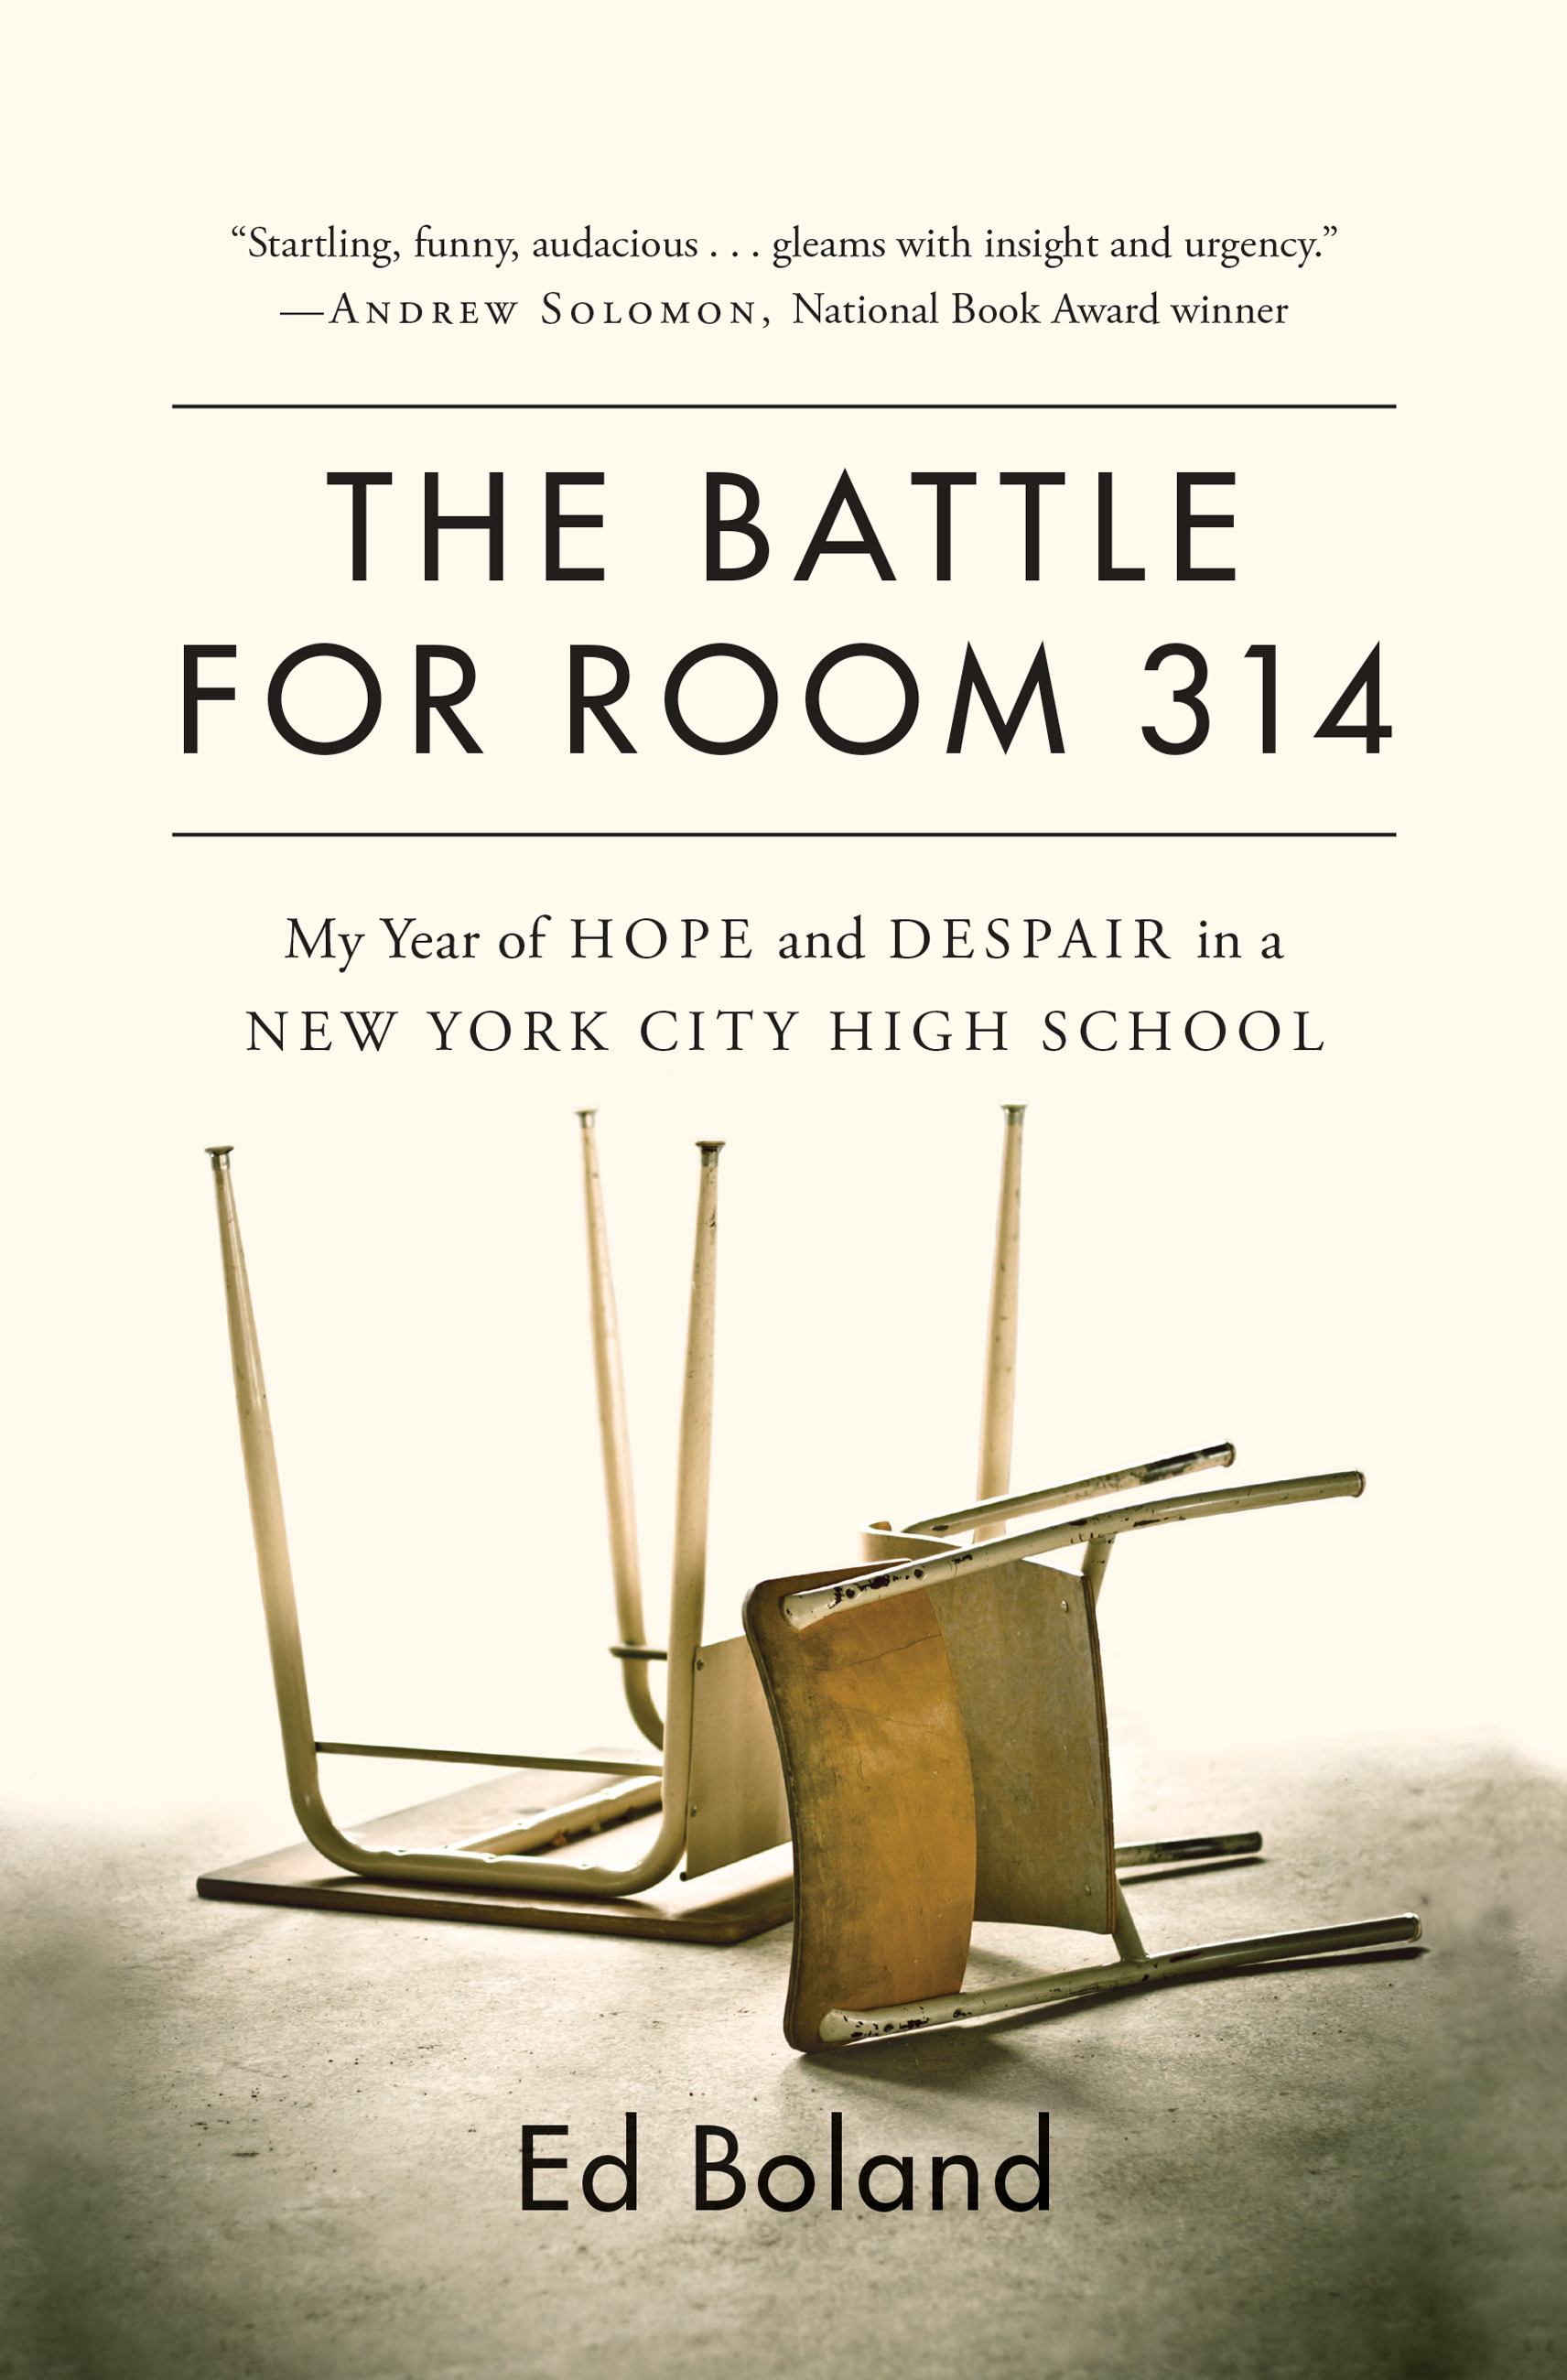 Image de couverture de The Battle for Room 314 [electronic resource] : My Year of Hope and Despair in a New York City High School